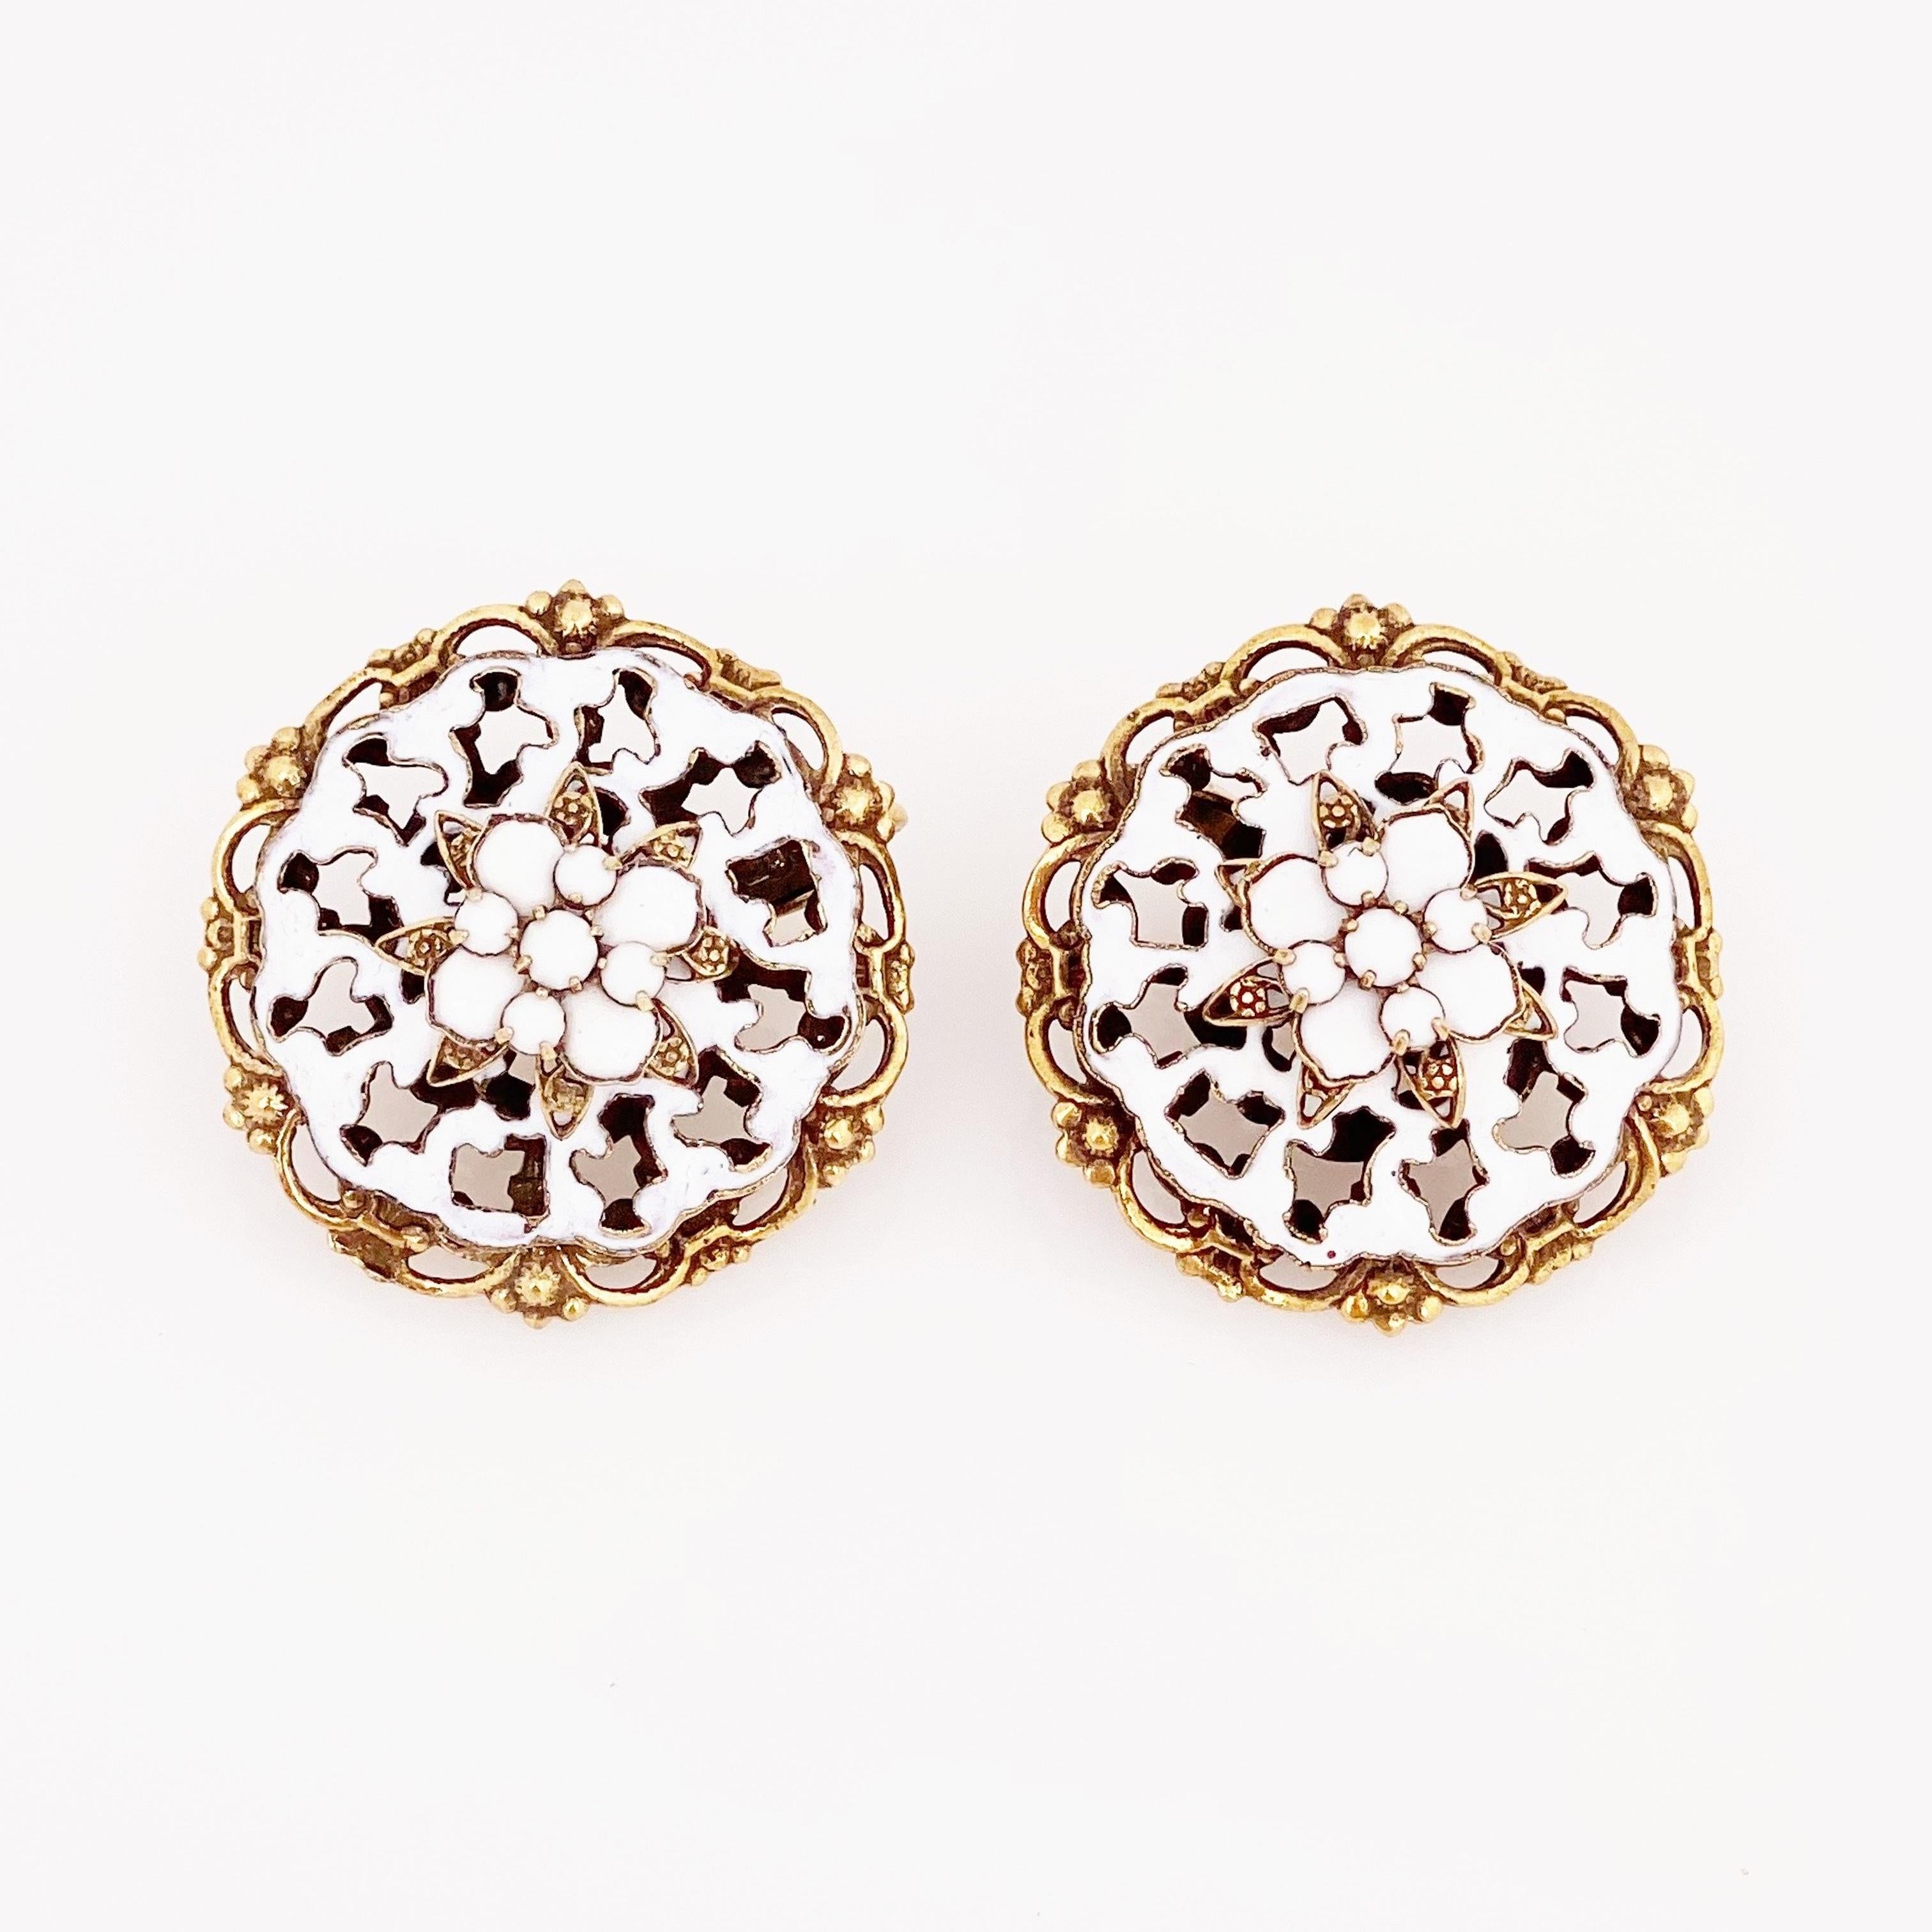 White Enamel Ornate Earrings With Milk Glass Rhinestones, 1950s In Good Condition For Sale In McKinney, TX